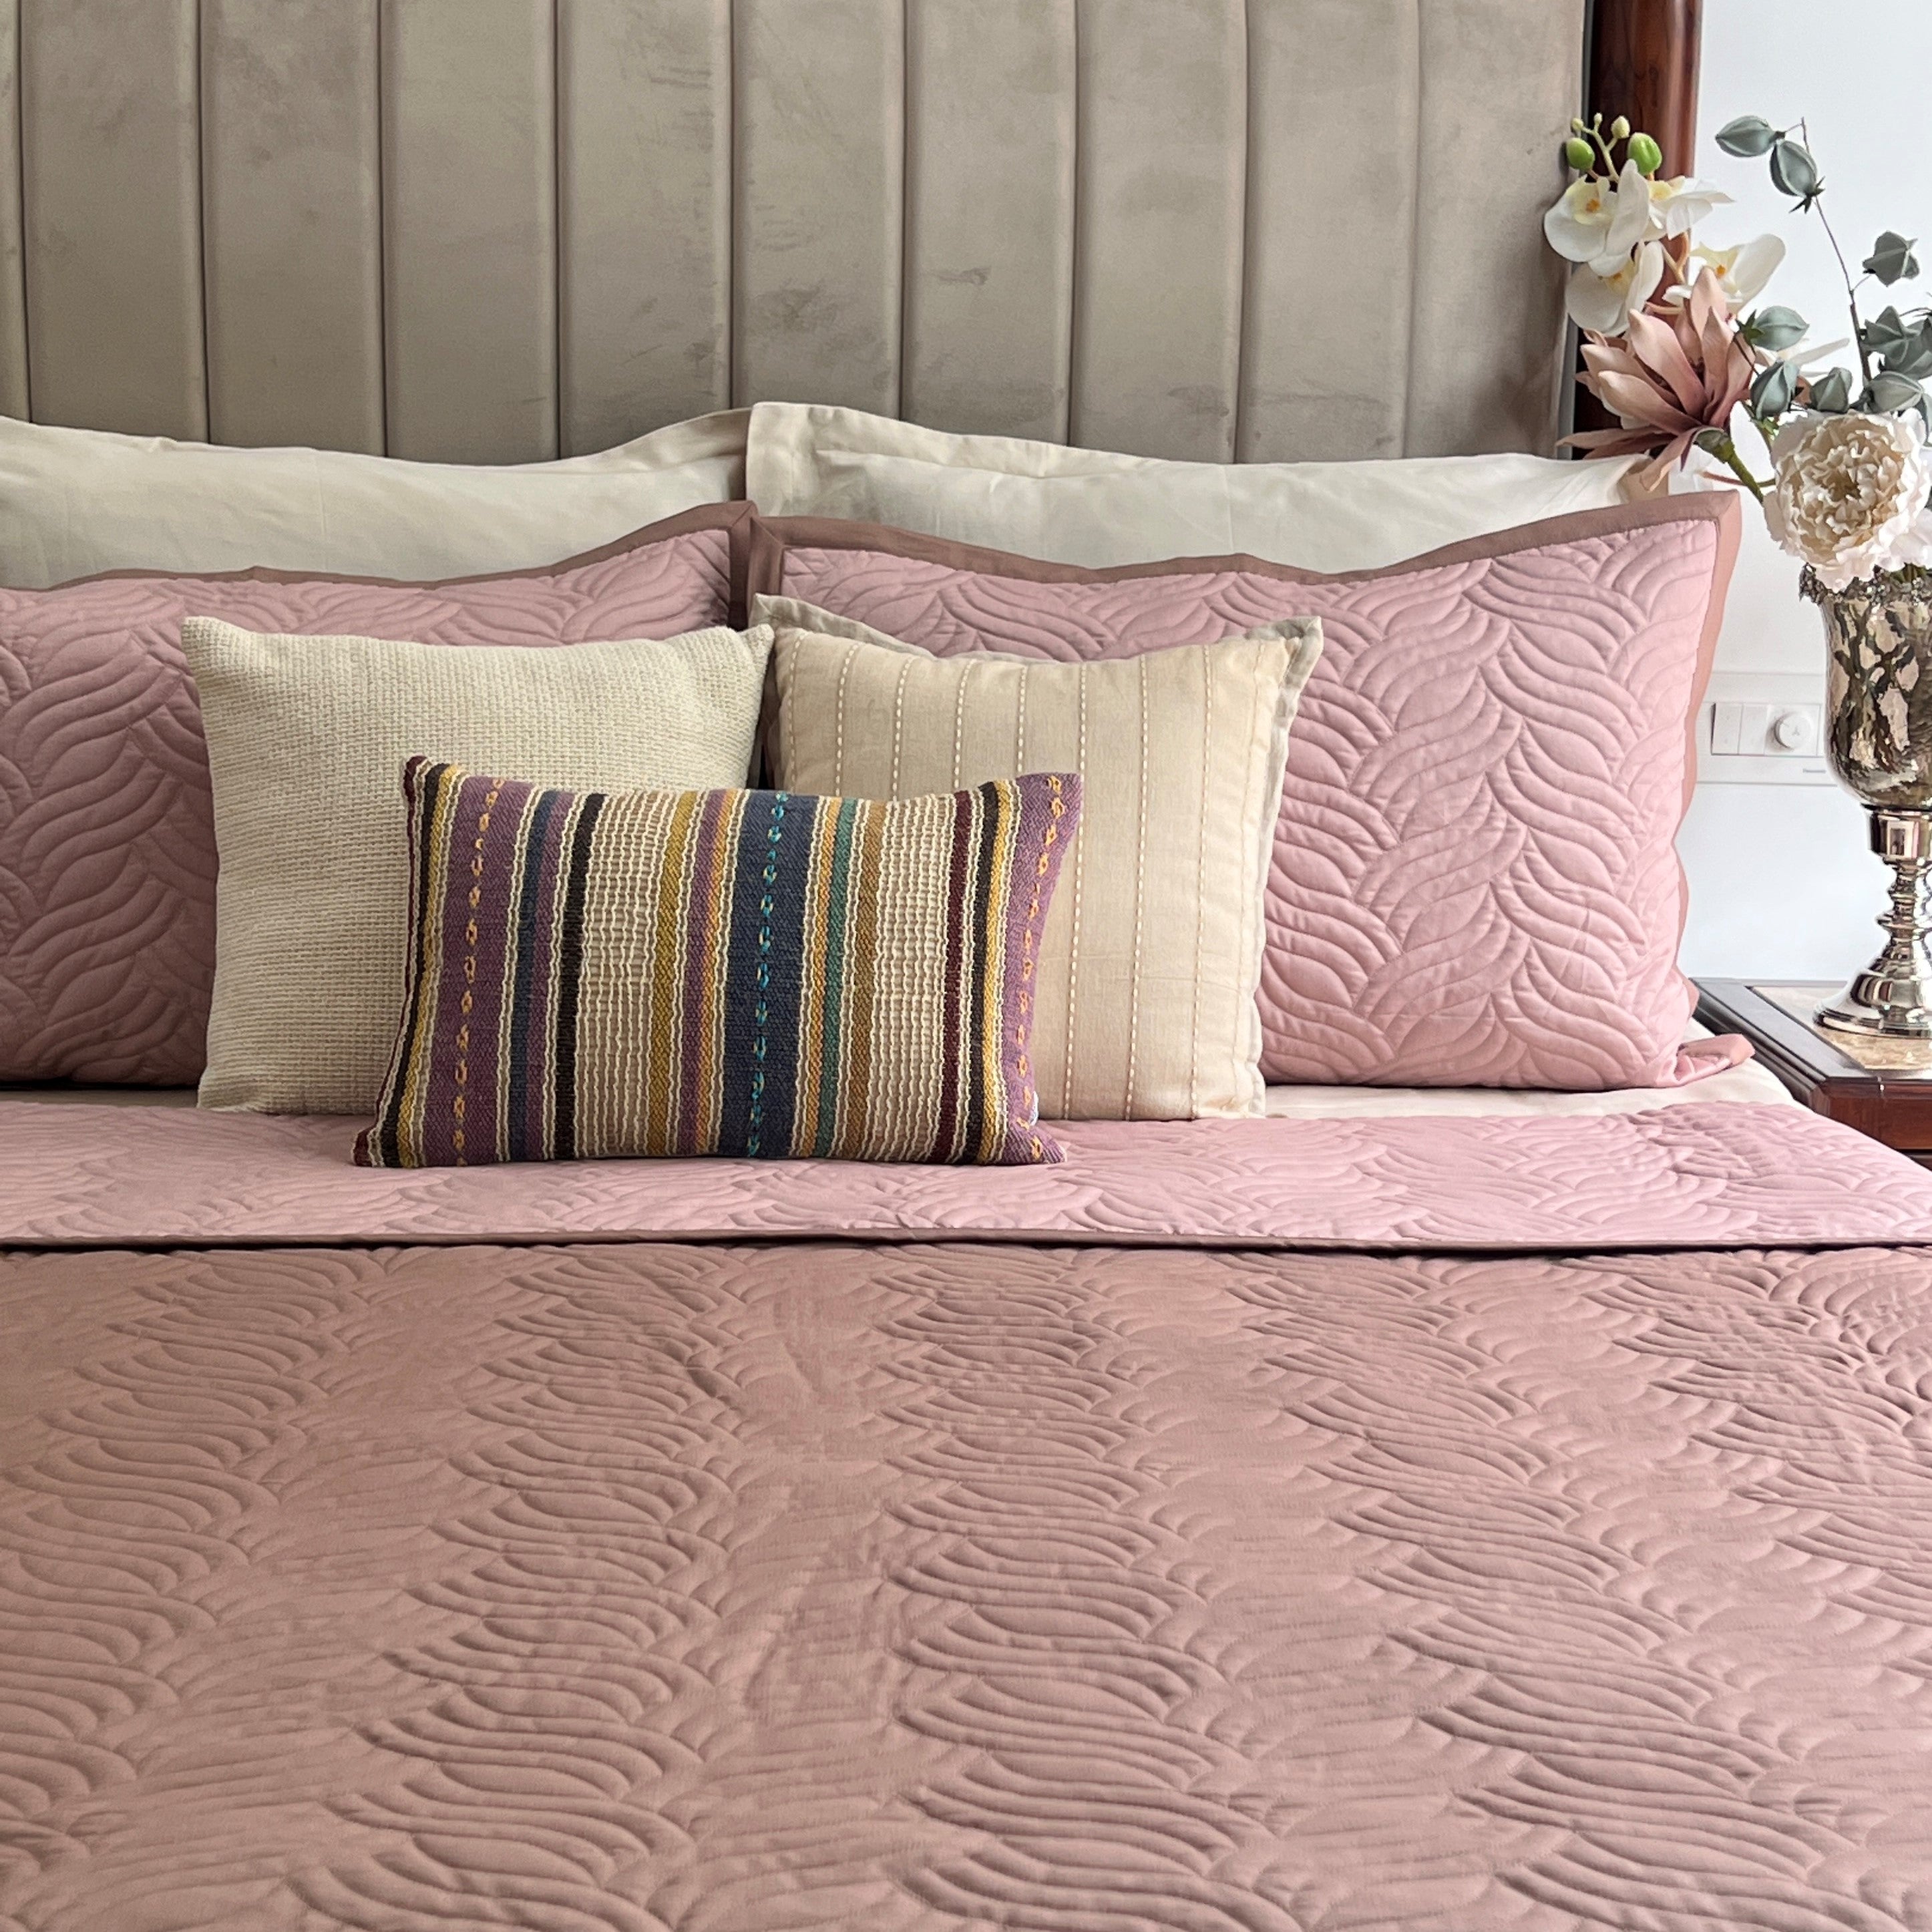 Quilted Brandy Rose and Old Rose Comber Reversible Bedspread